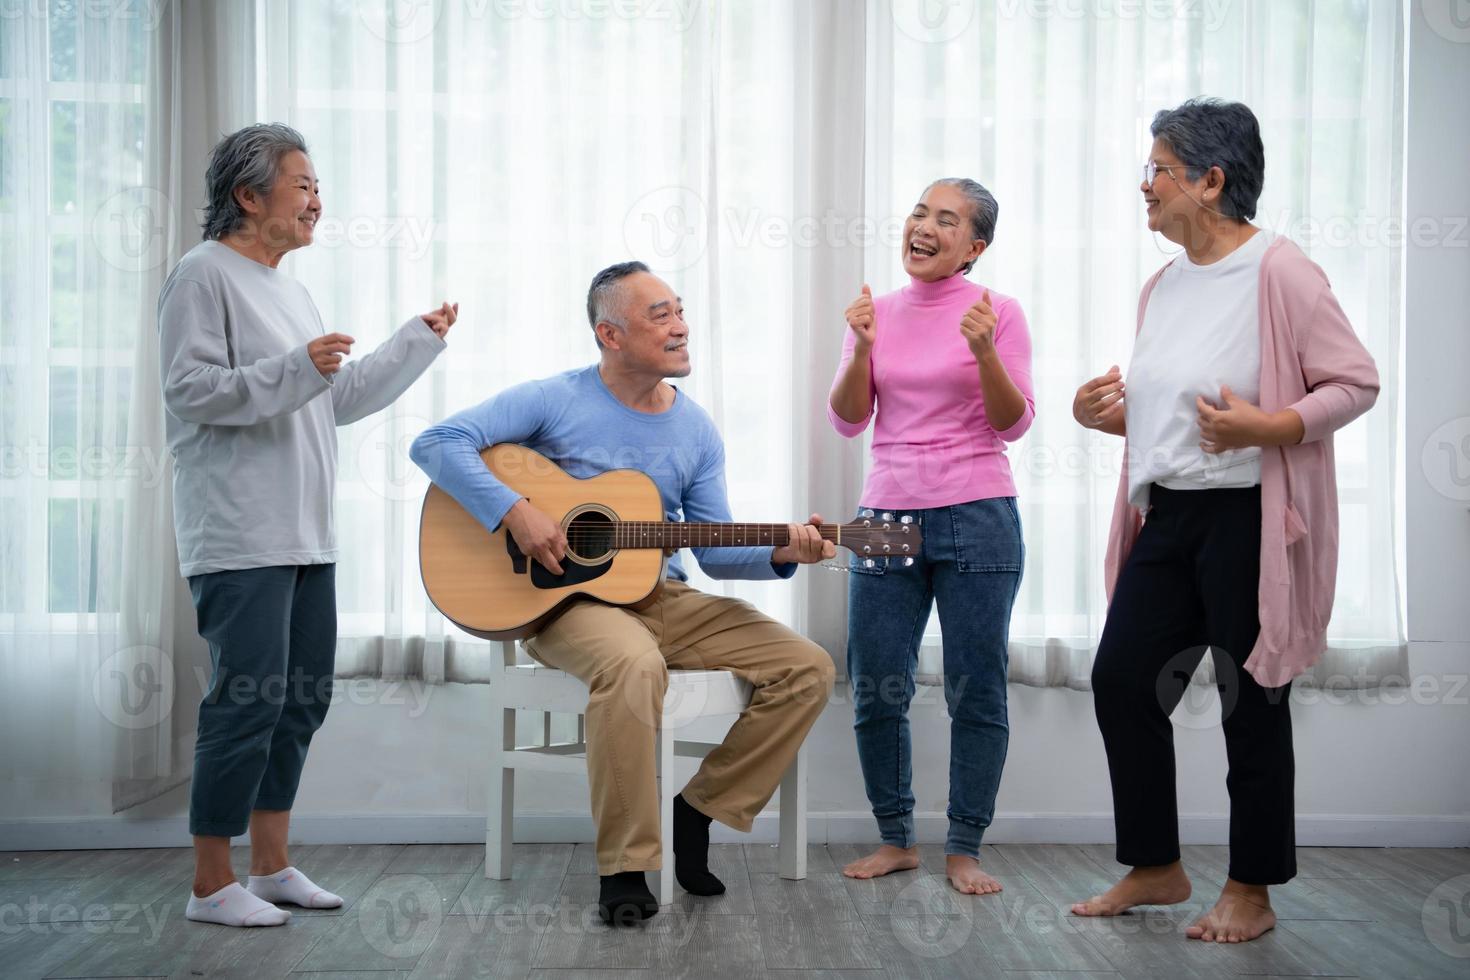 Old people's companions To unwind during the weekend, gather together for activities photo